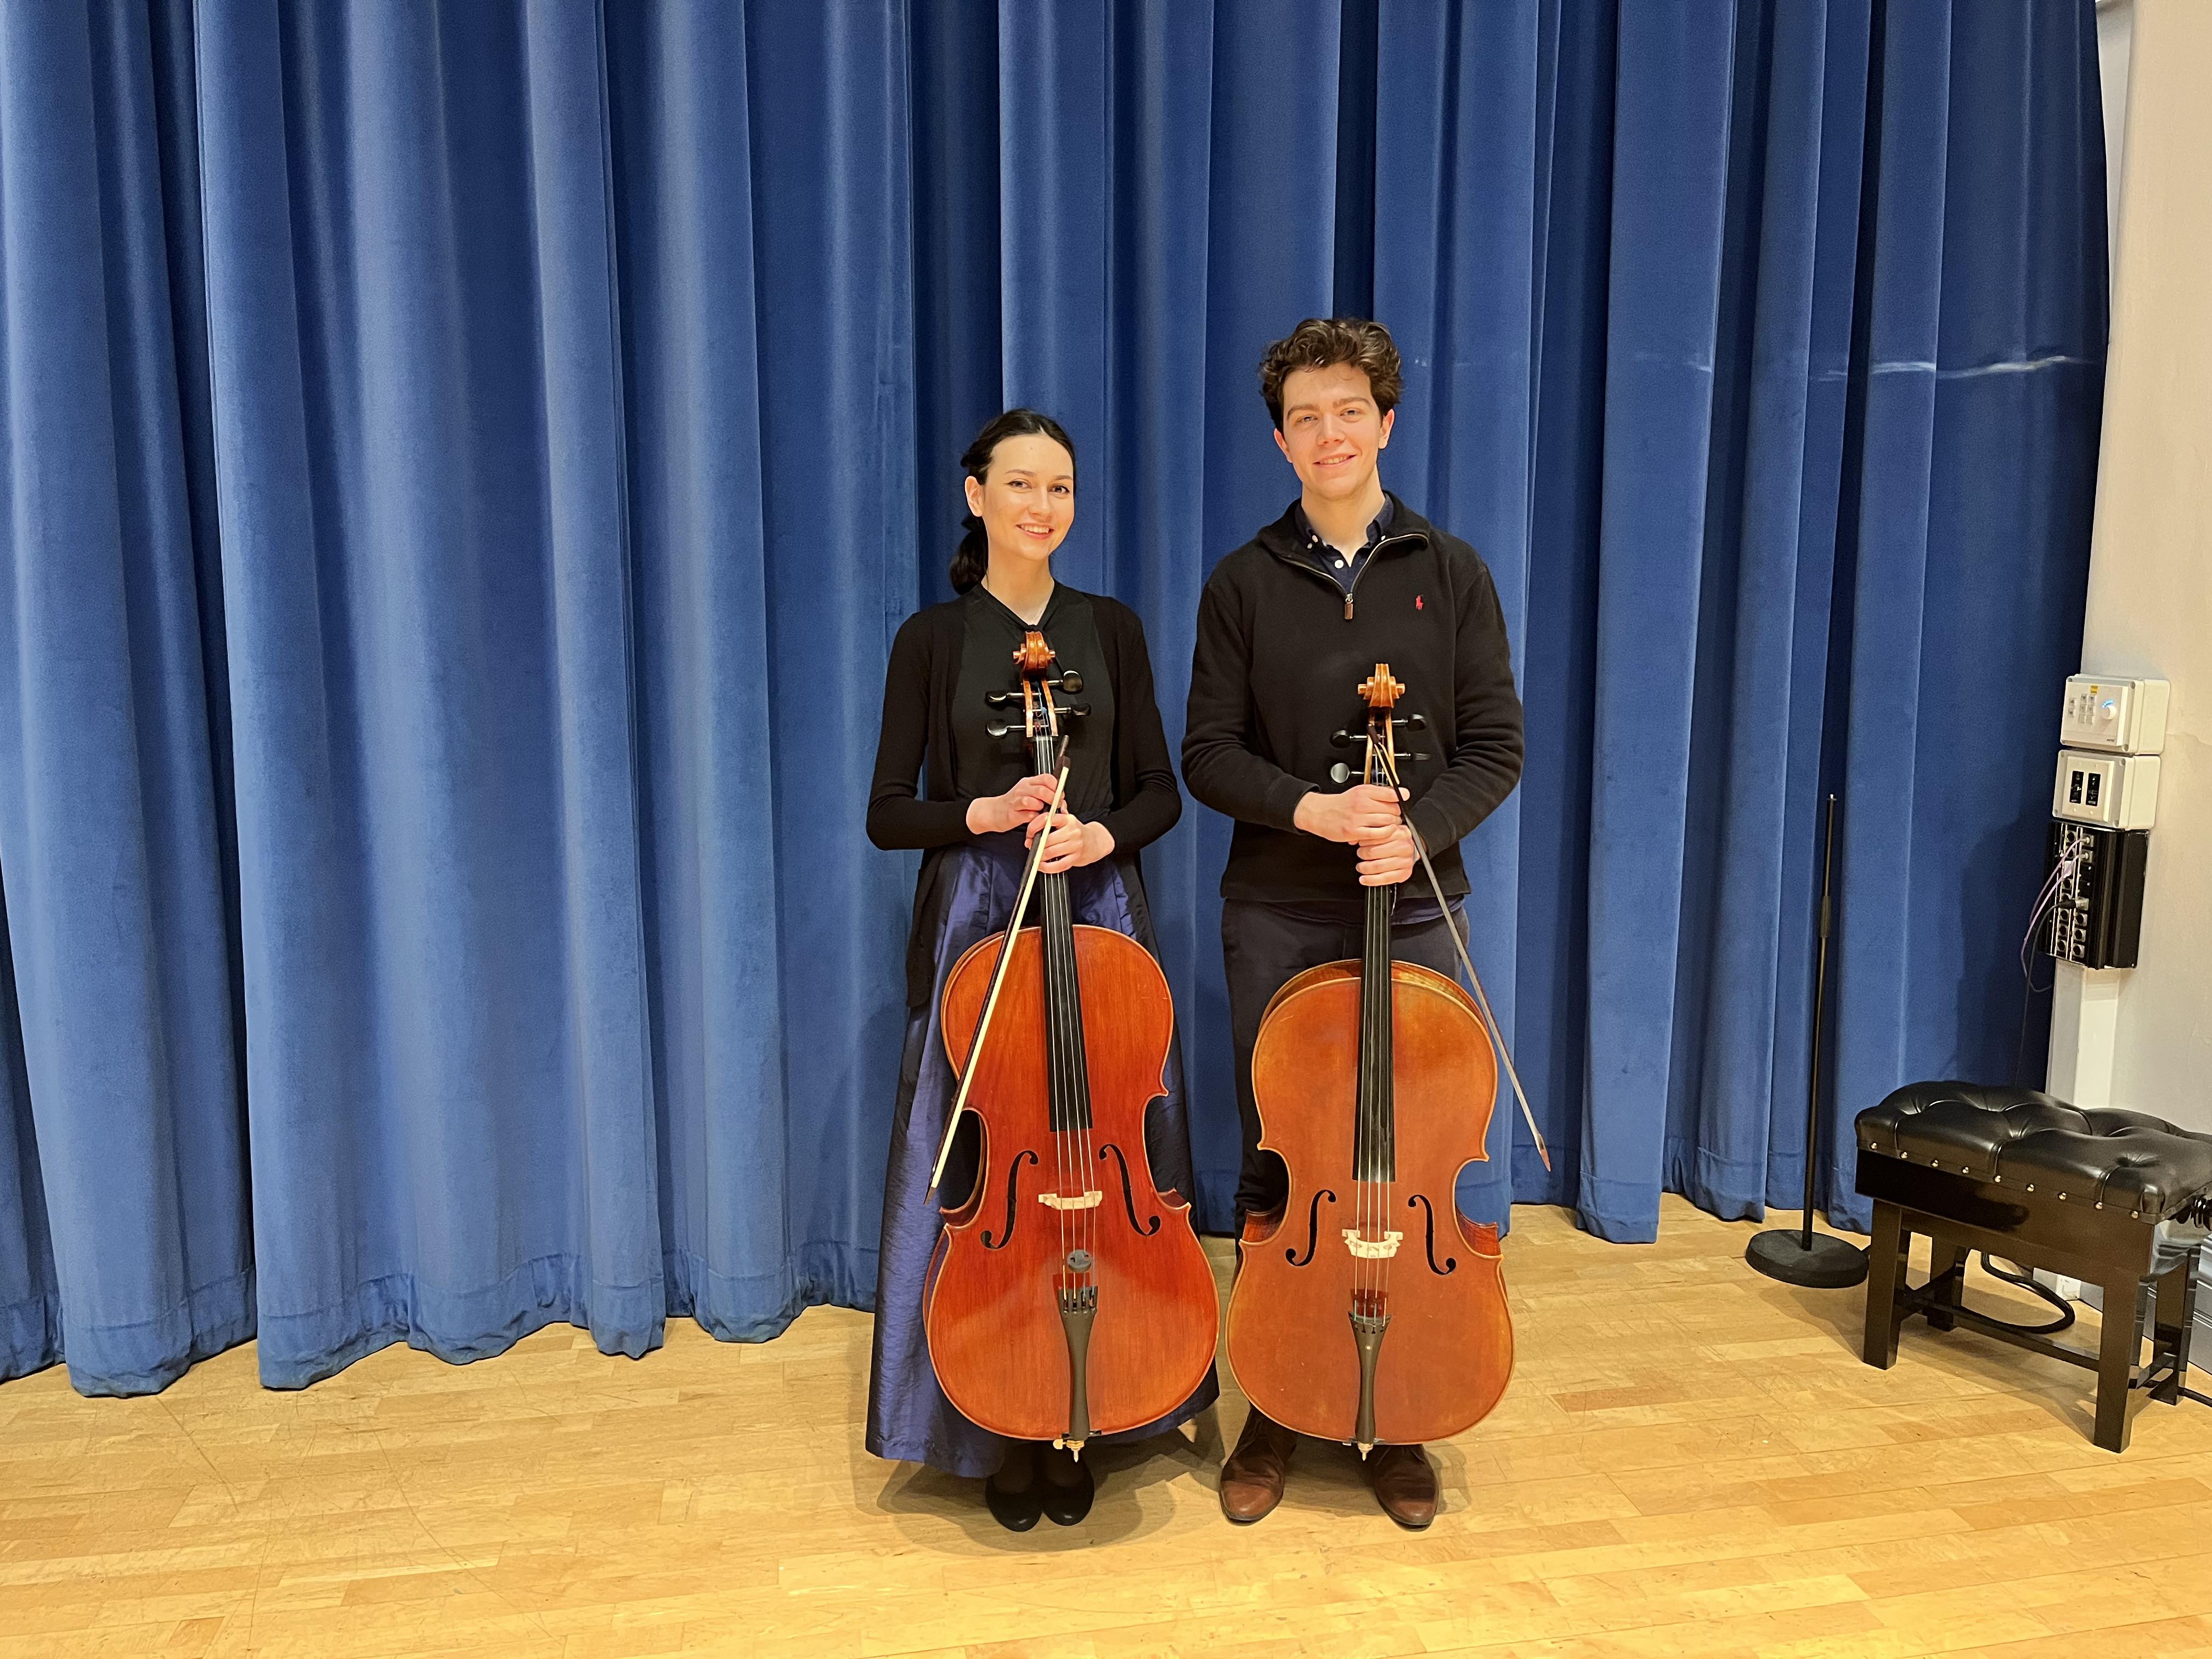 A photo of both Mina Jachimowicz (MA Music Historical Performance) and Nick Booth (BA Music) standing behind thier Cellos